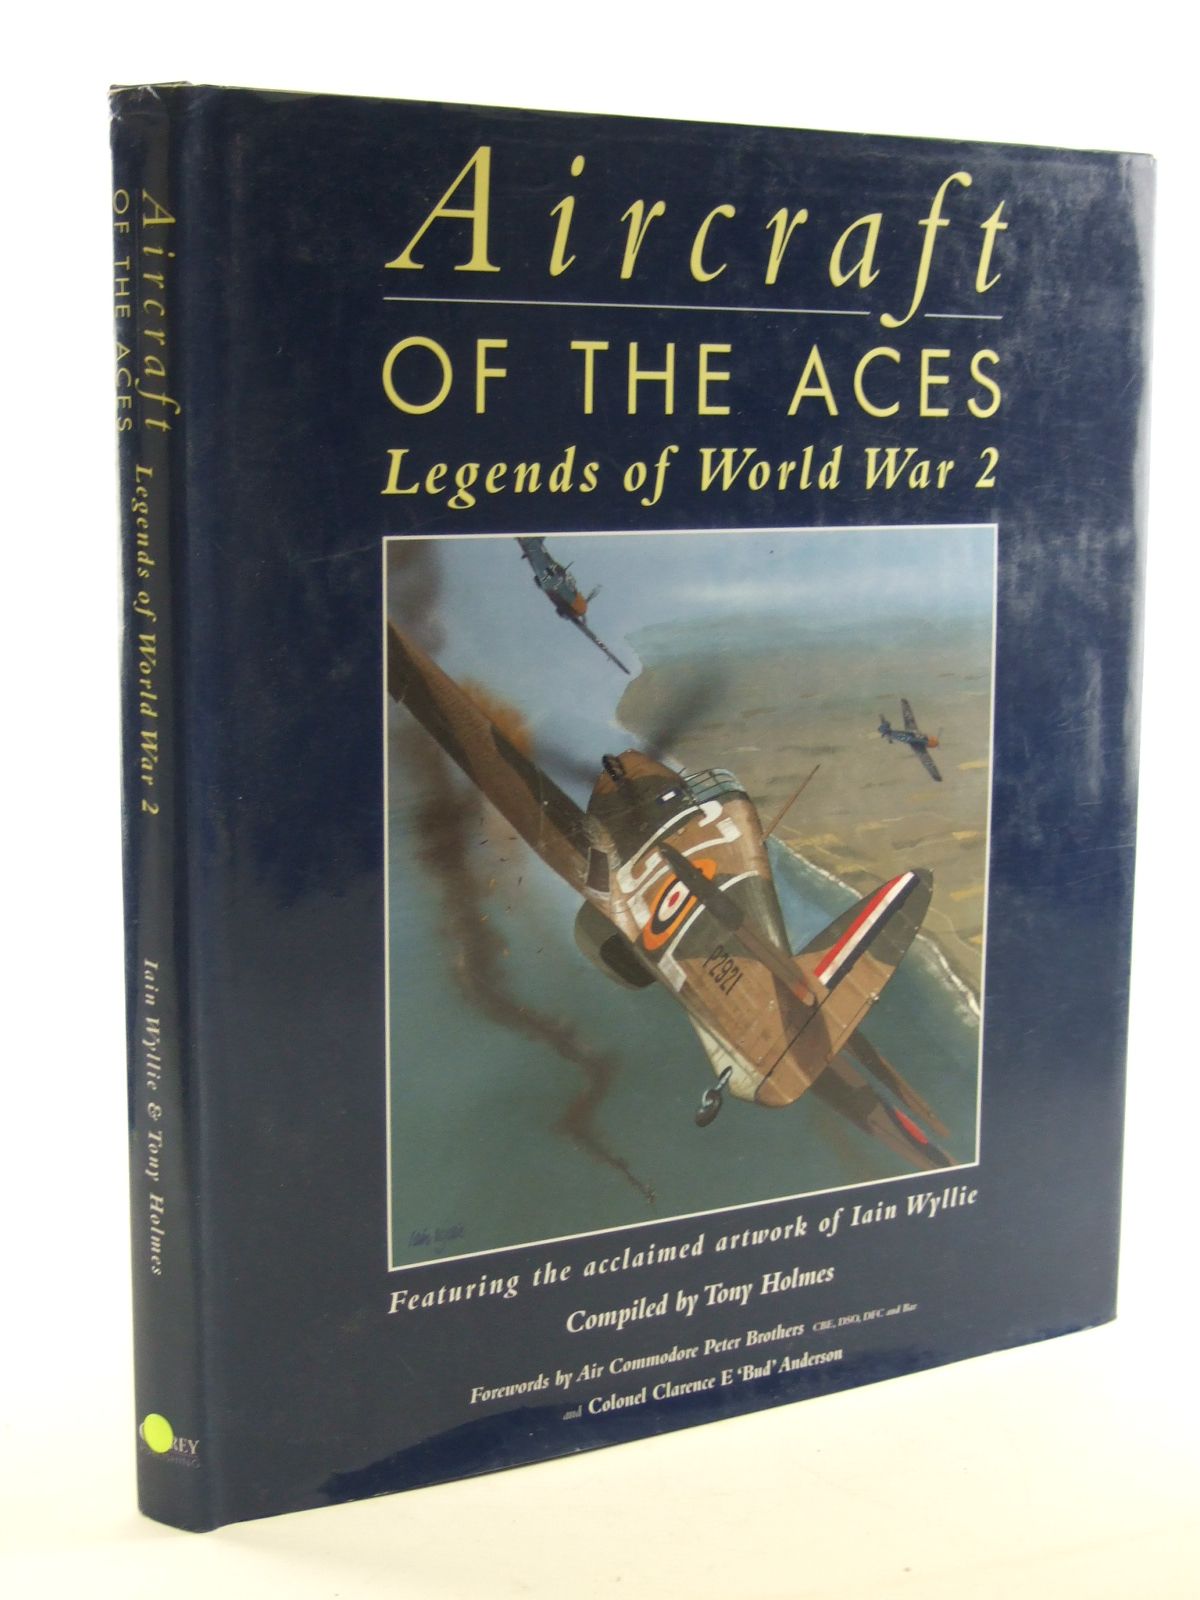 AIRCRAFT OF THE ACES LEGENDS OF WORLD WAR 2 FEATURING THE ACCLAIMED ARTWORK OF IAIN WYLLIE ...